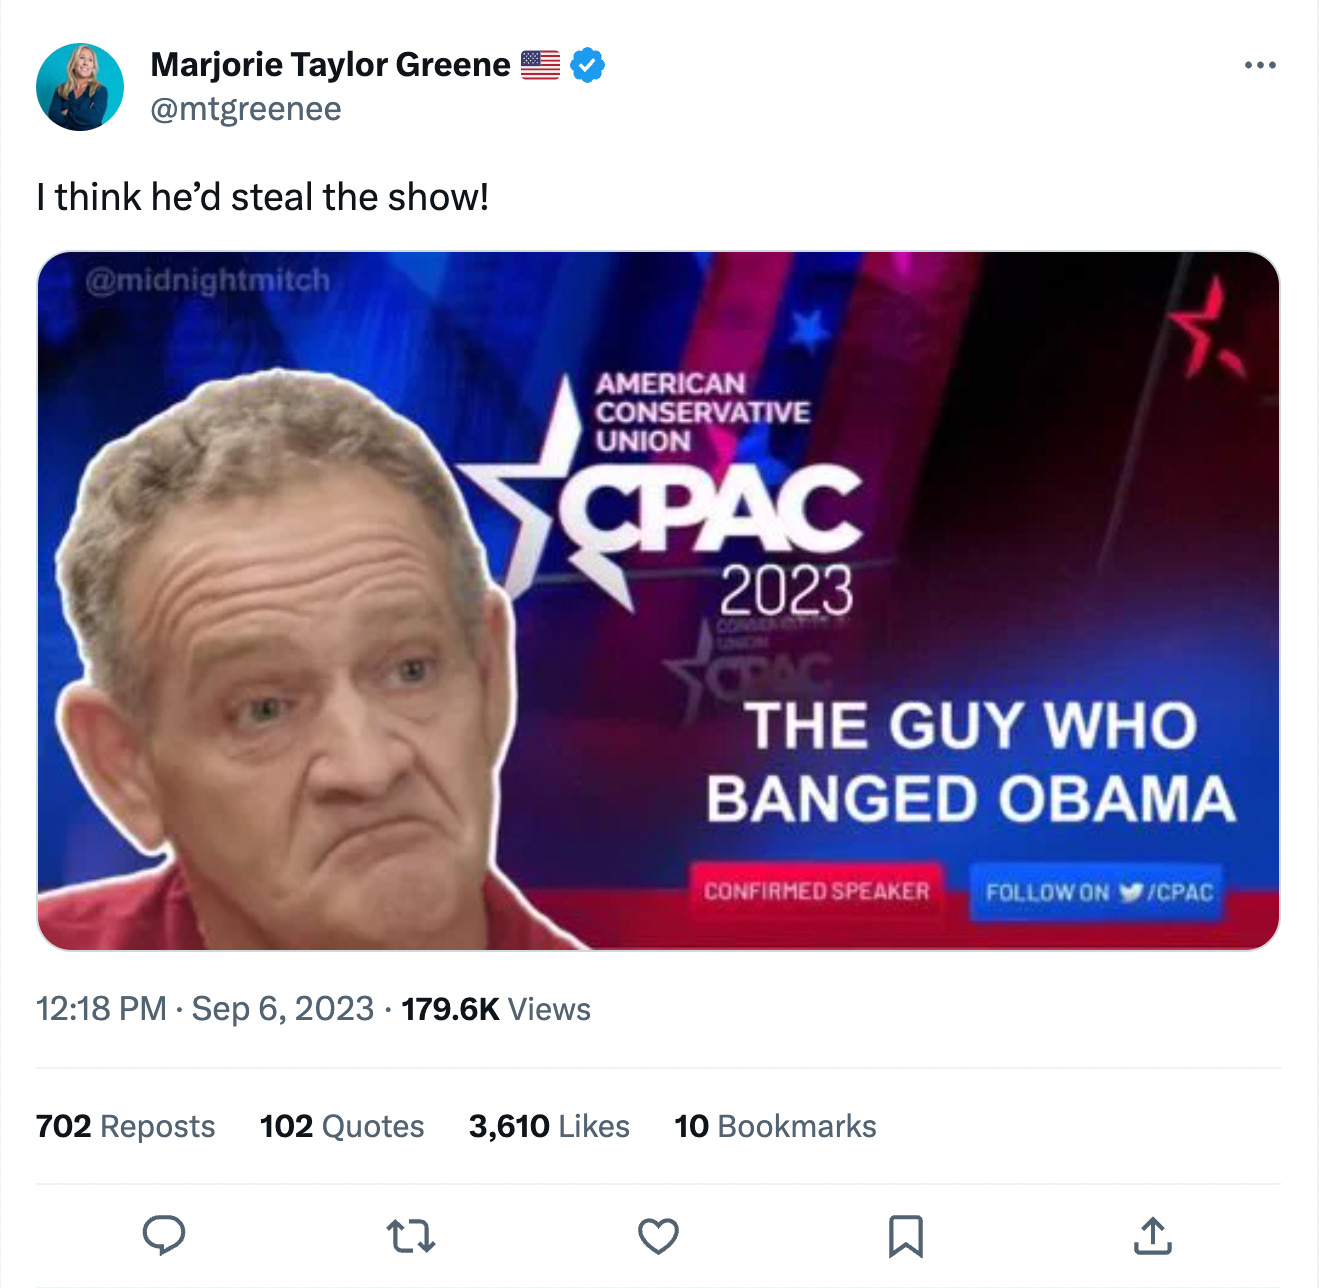 Marjorie Taylor Greene tweet: "I think he'd steal the show!" with CPAC mockup "the guy who banged obama"